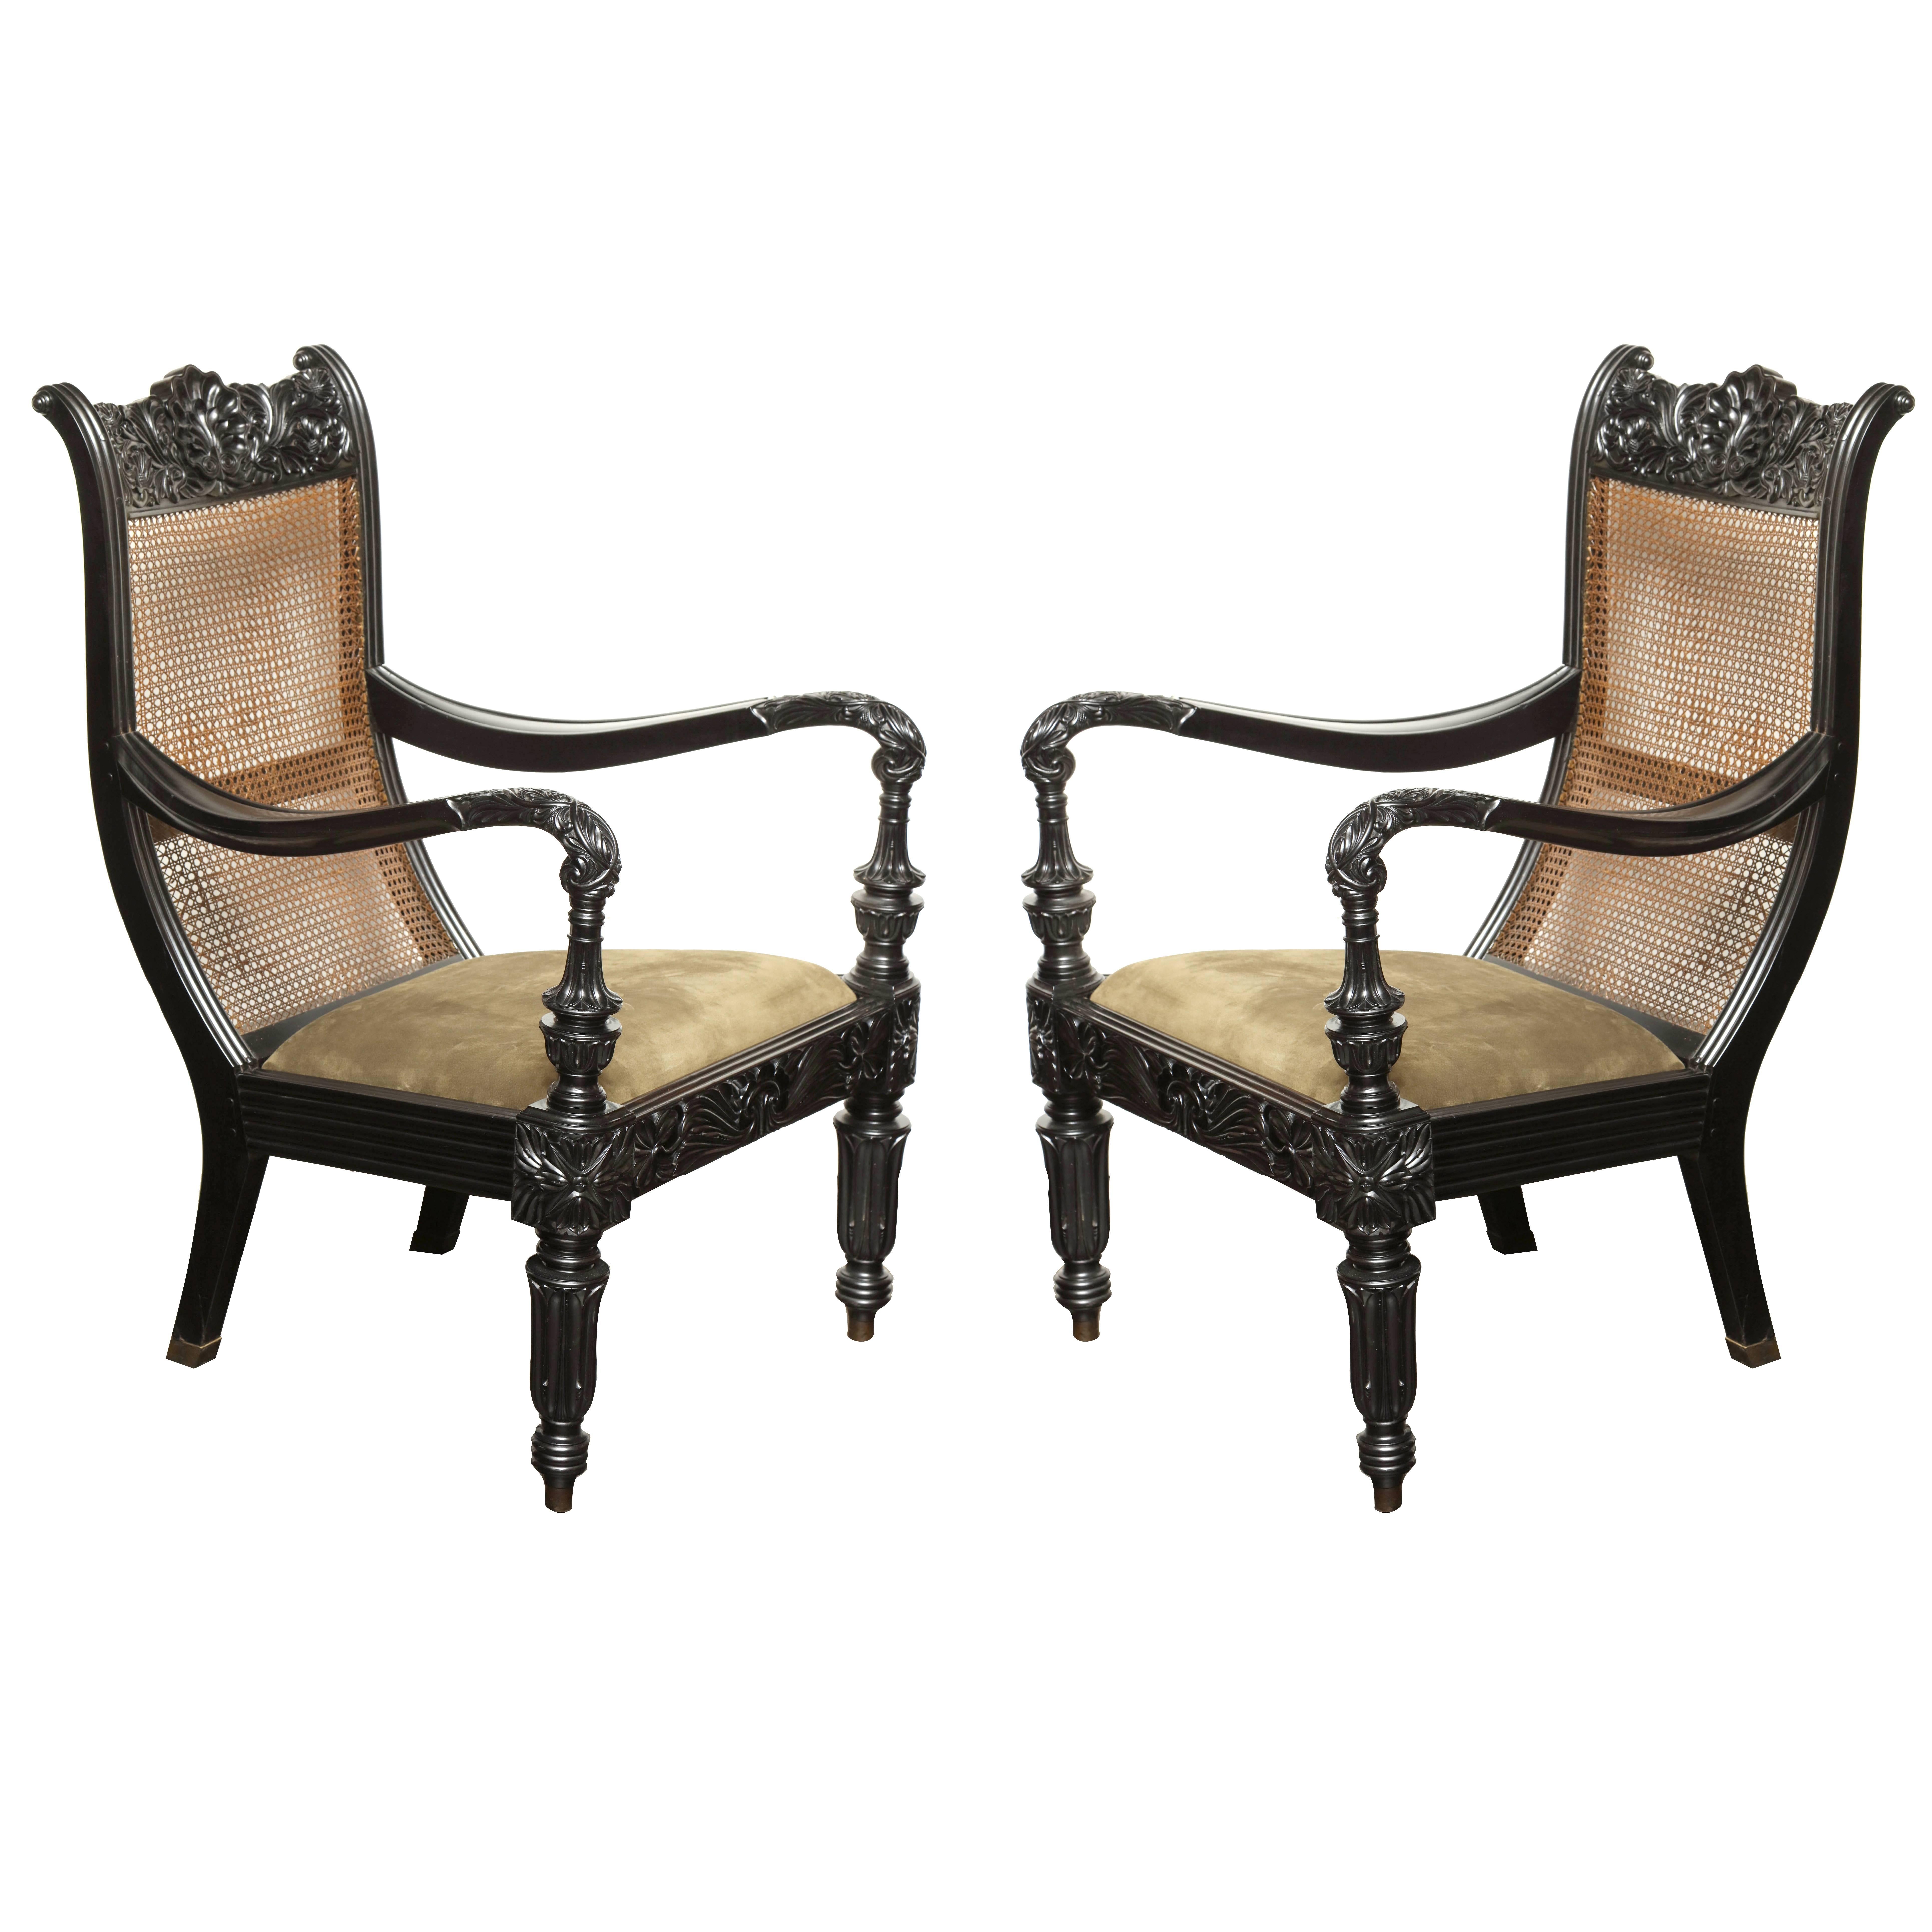 Pair of Raj, Cane Back Planters Chairs, circa 1830 For Sale